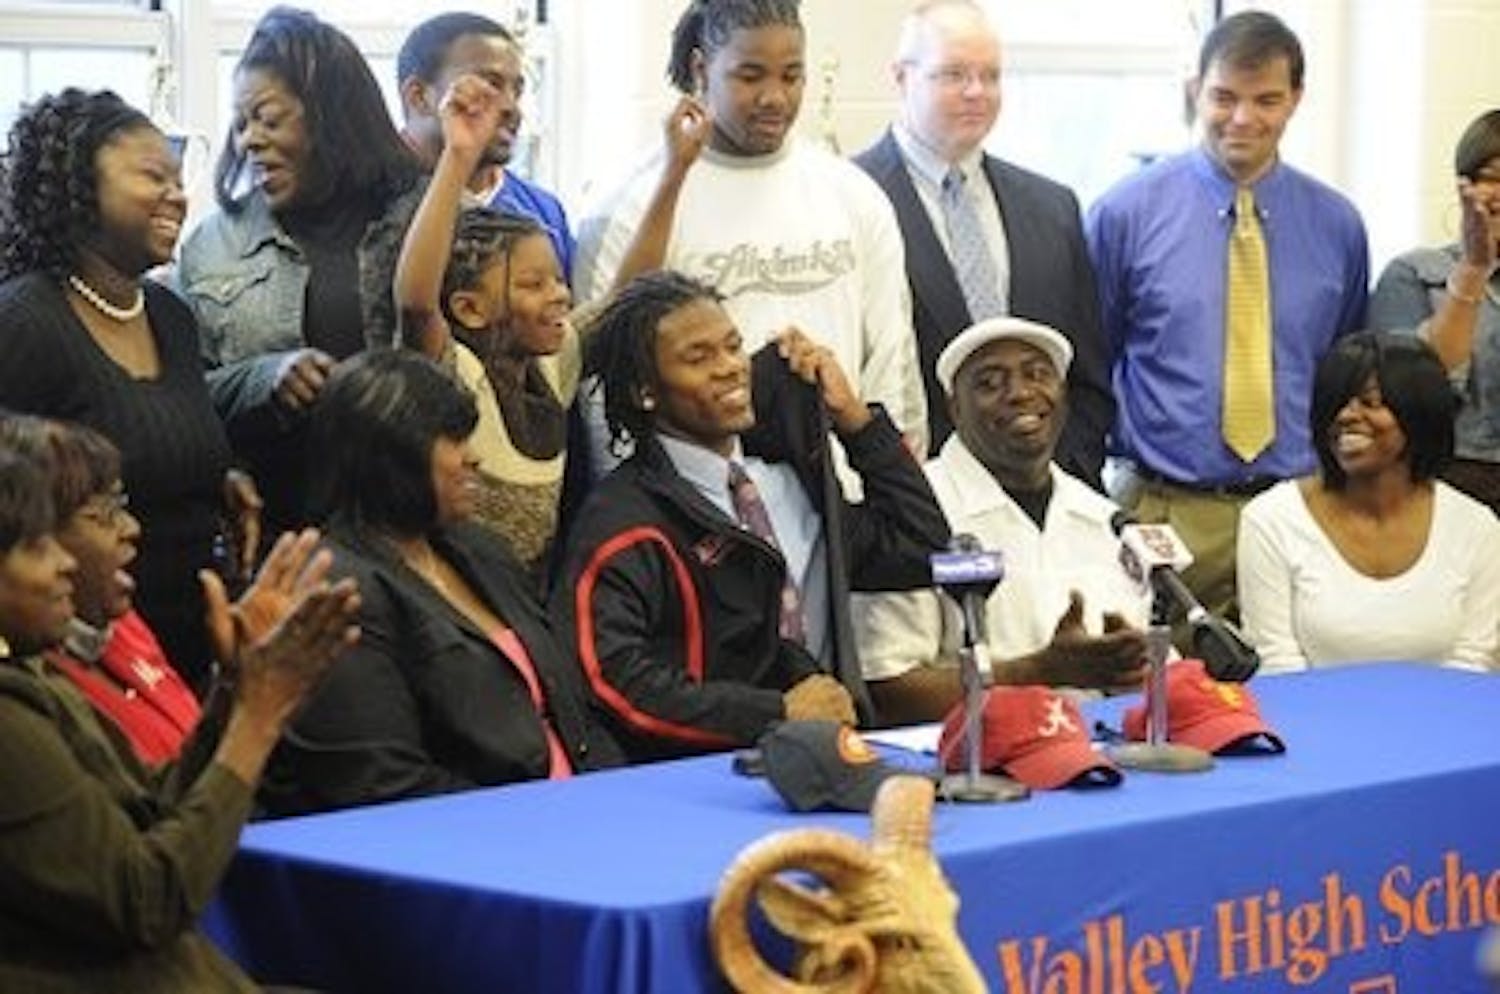 Valley High School star Erique Florence unzips his jacket to reveal an Auburn tie on National Signing Day last year. (Photo courtesy of the Opelika-Auburn News)